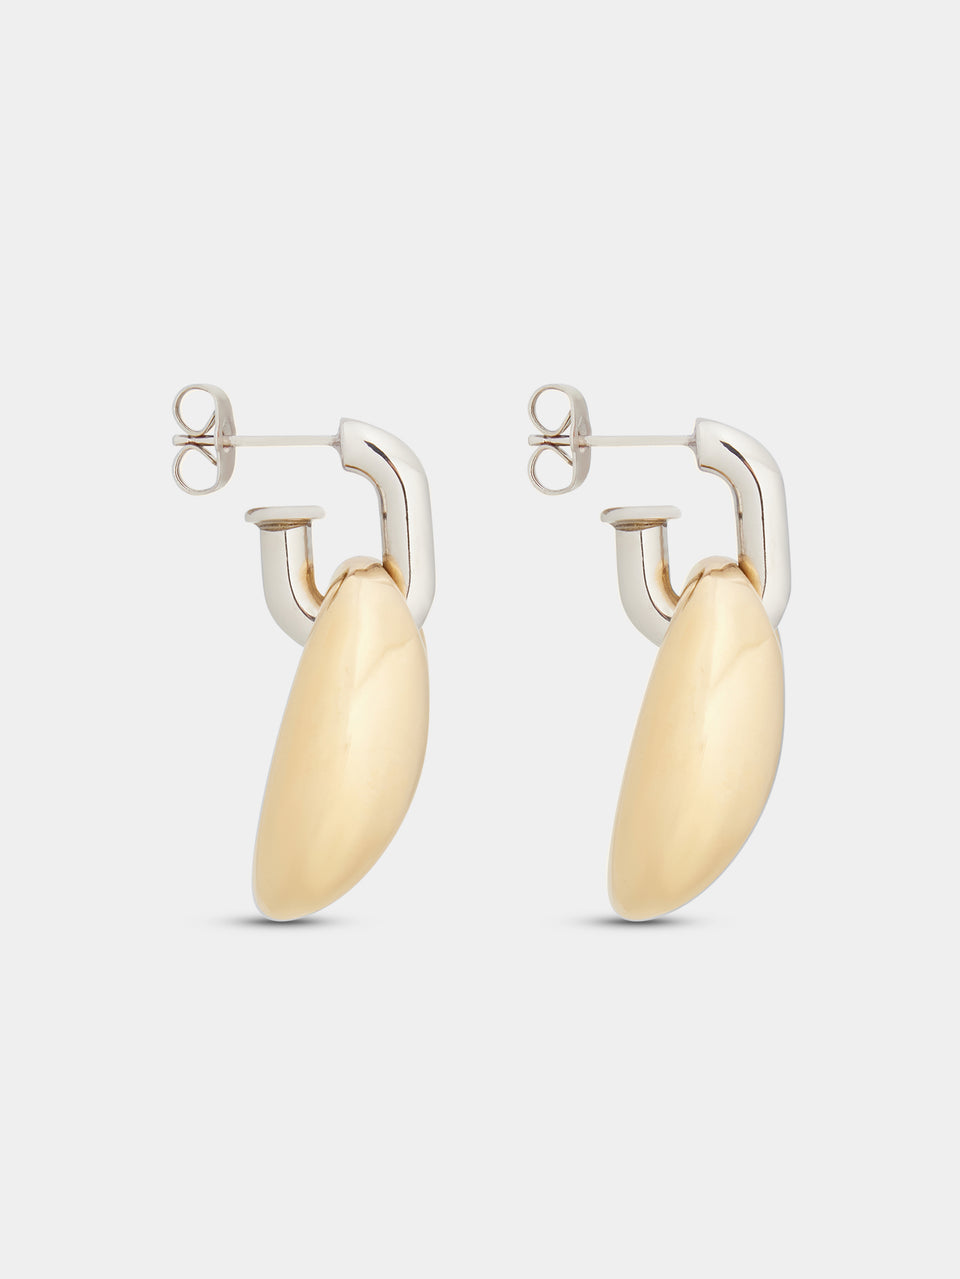 Boucles d'oreilles Eight chunky or-argent 